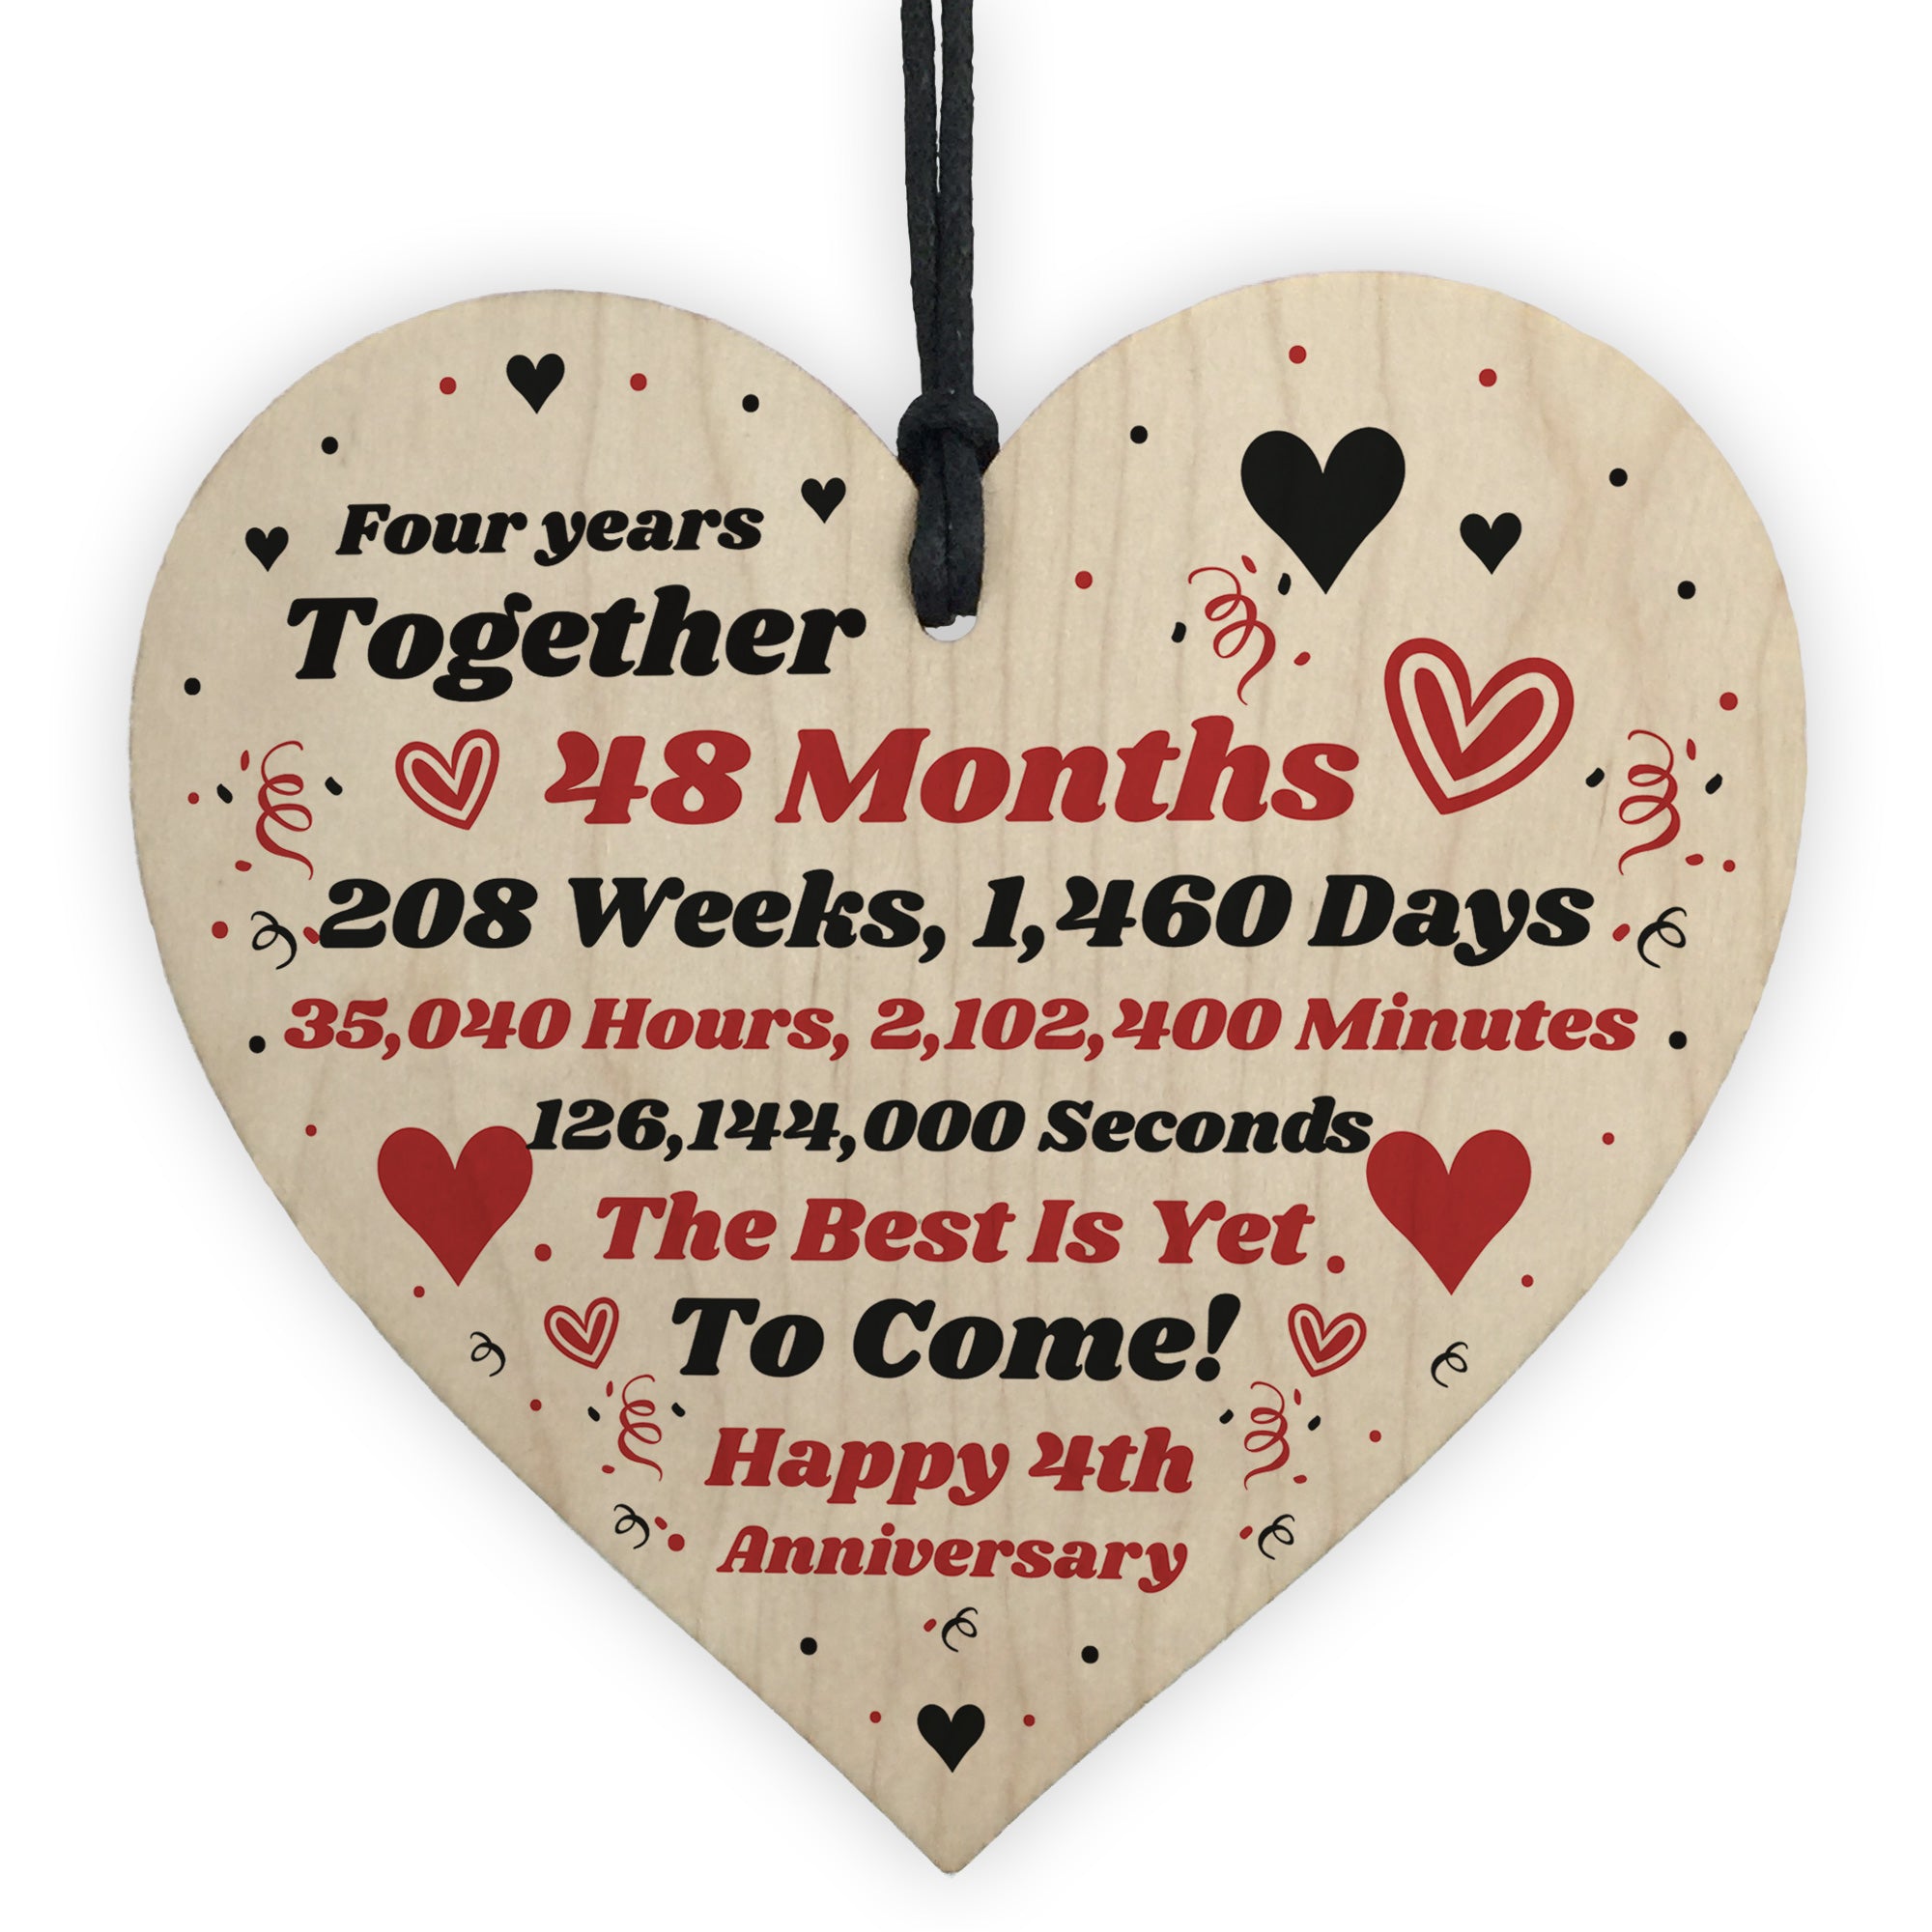 165+ Happy Anniversary Quotes & Wishes for Couples - DIVEIN